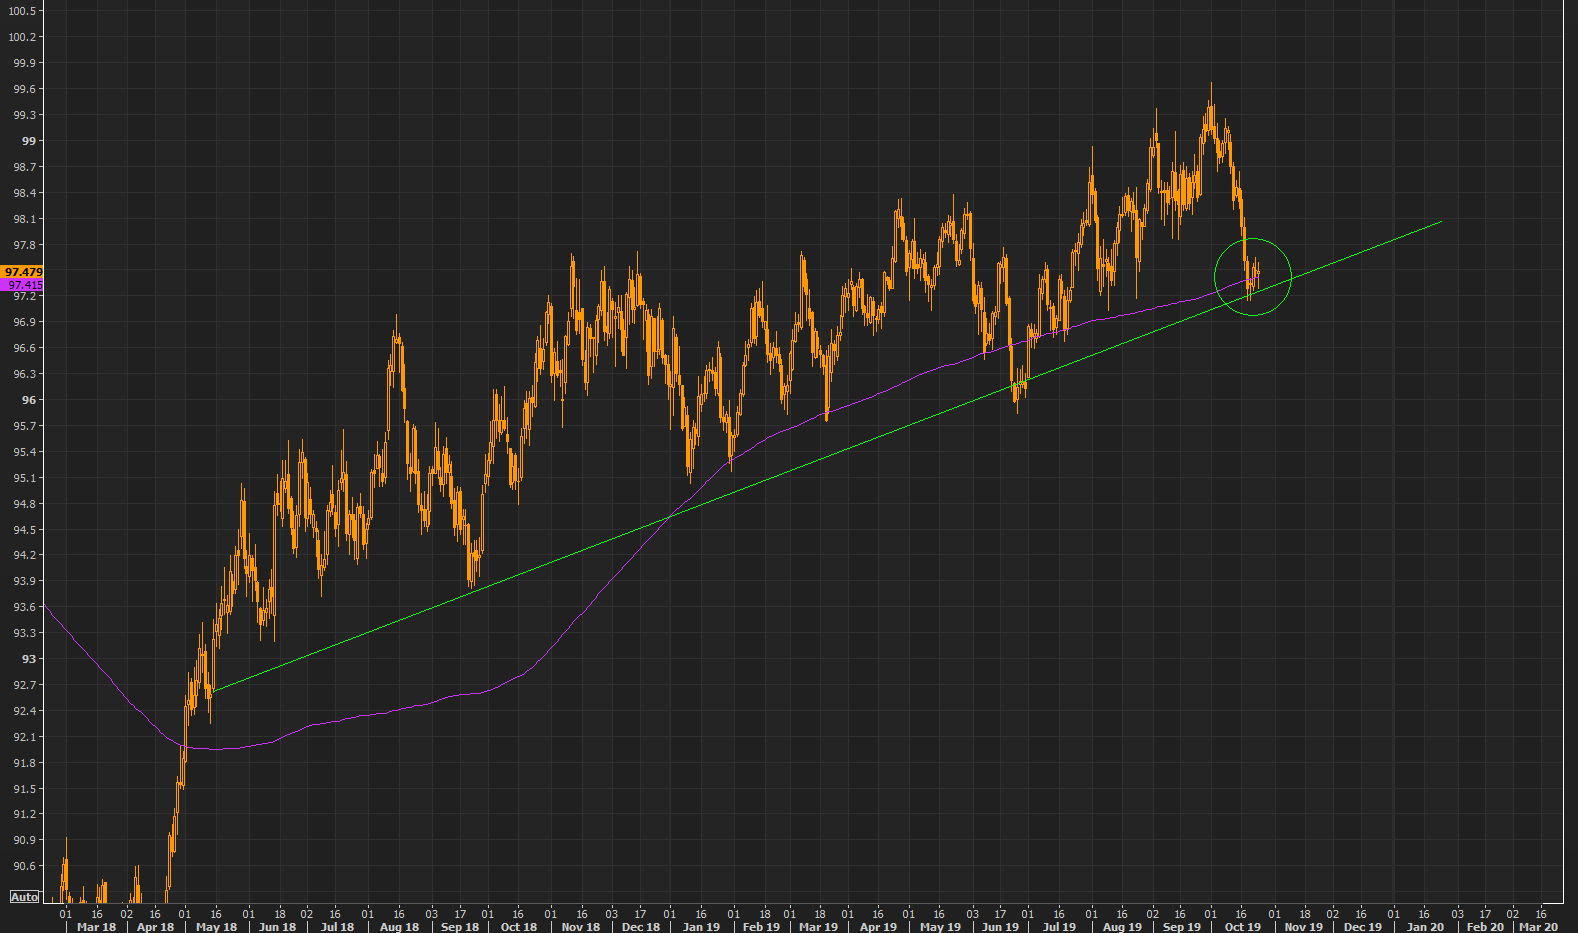 DXY - the 200 day average